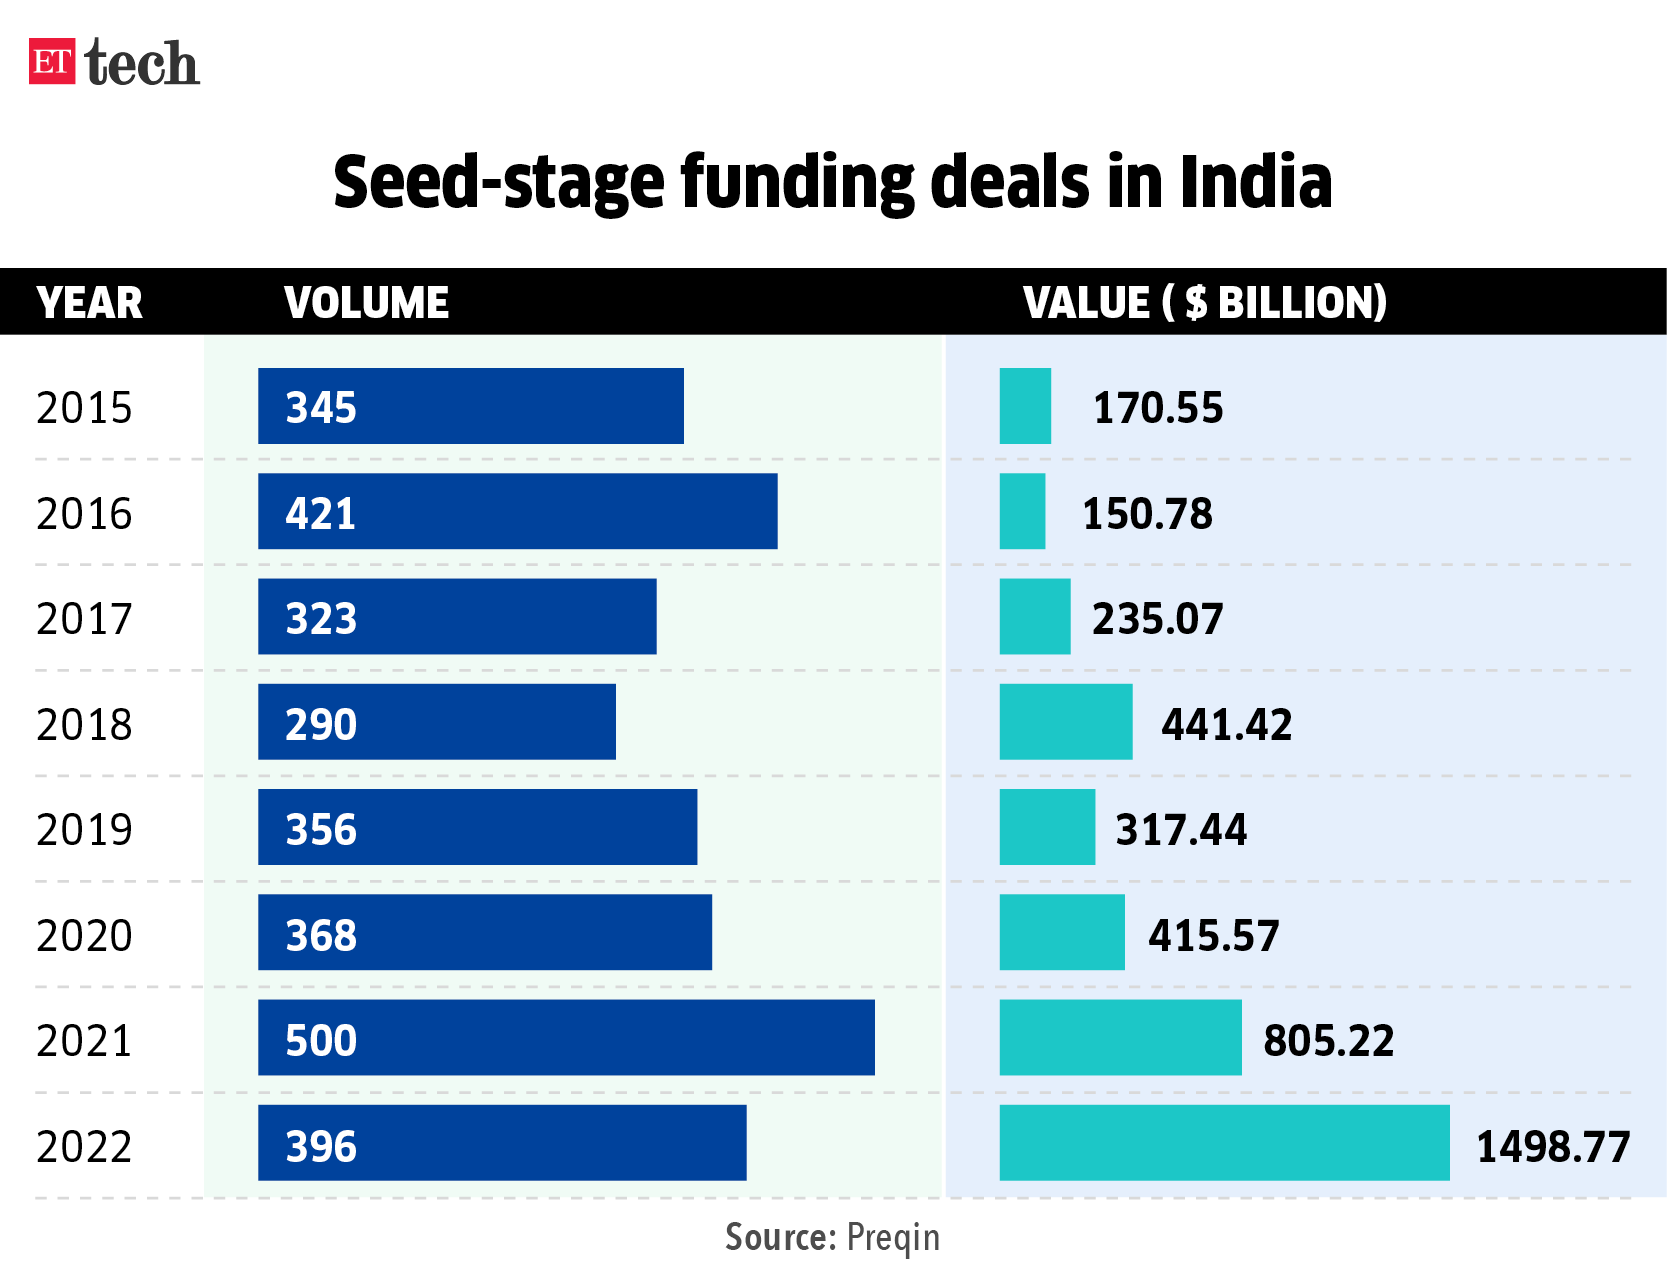 Seed-stage funding deals in India_Graphic_ETTECH